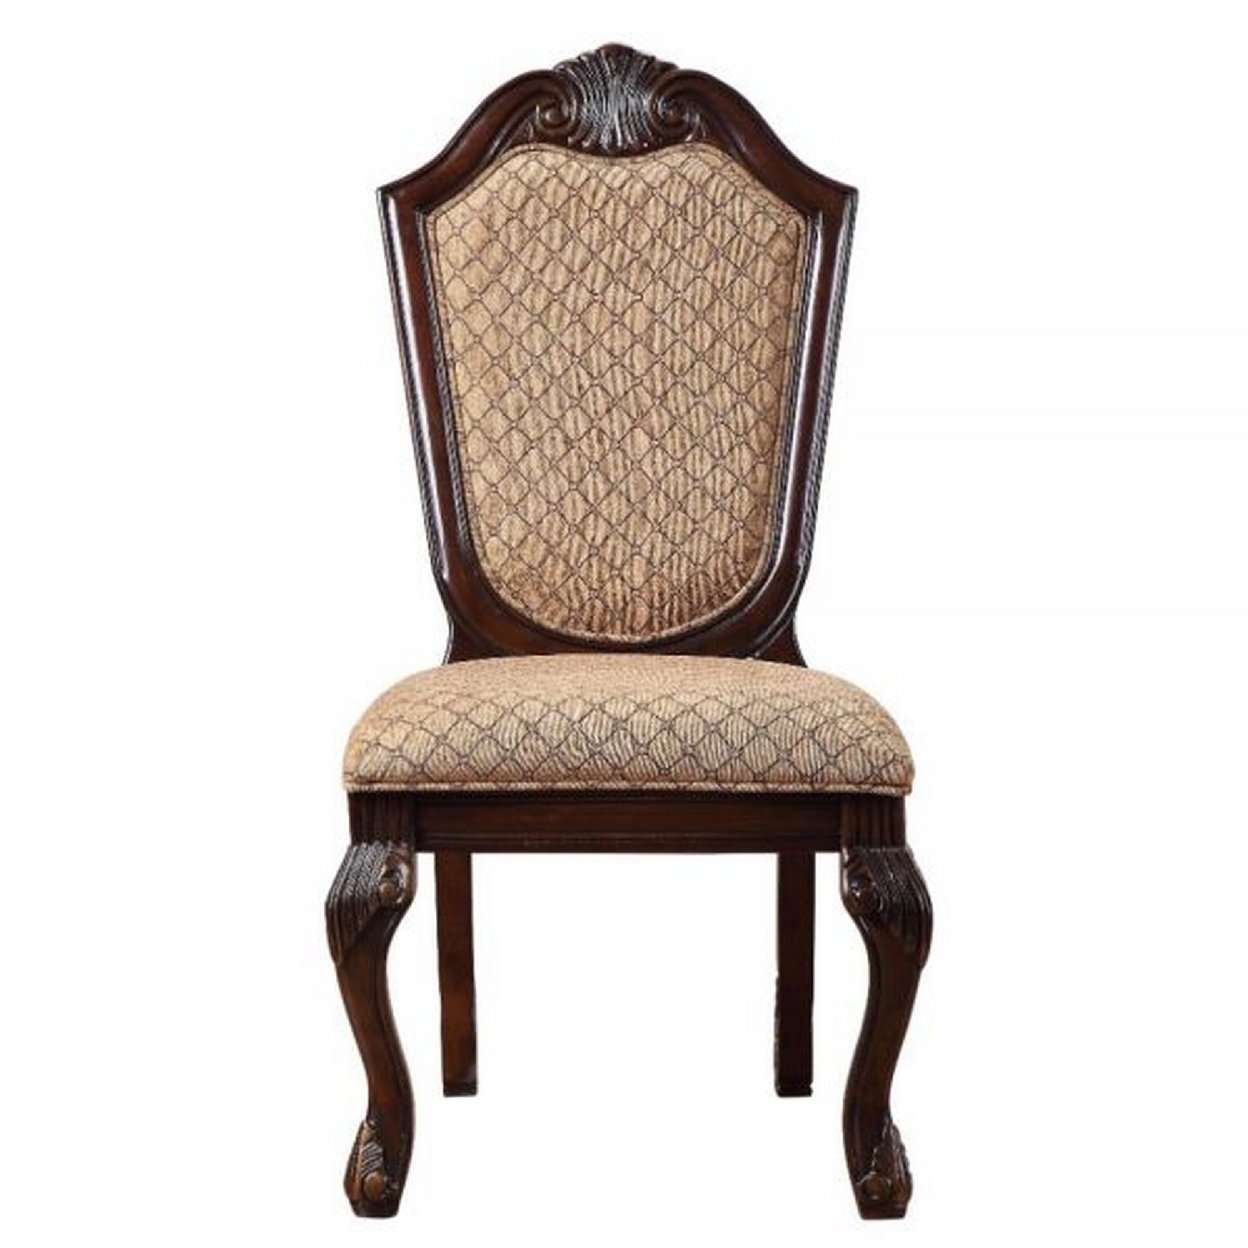 Side Chair With Padded Seating And Cabriole Legs, Set Of 2, Brown- Saltoro Sherpi